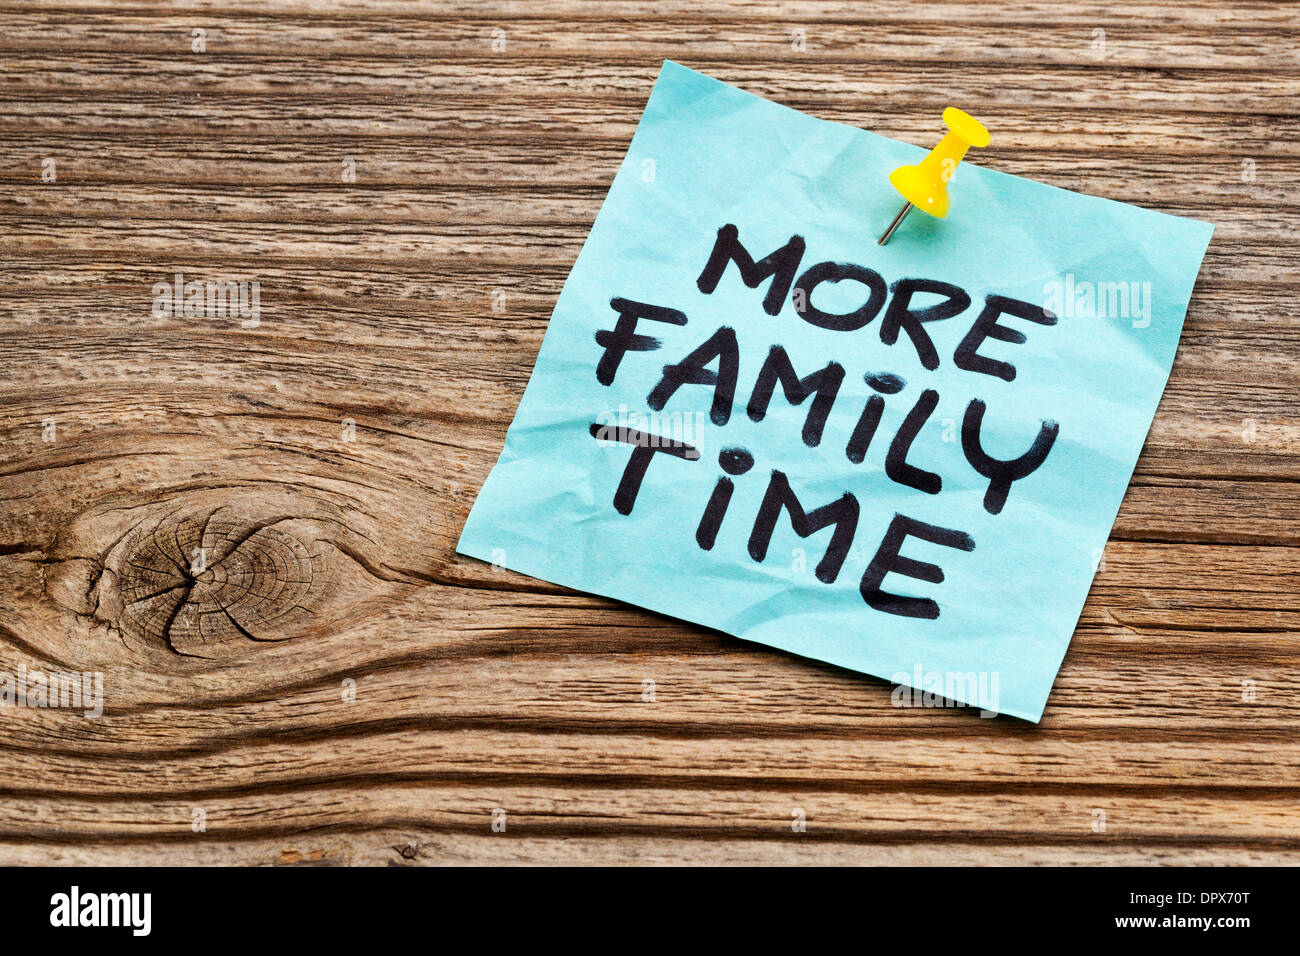 more family time reminder note against grained weathered wood Stock Photo